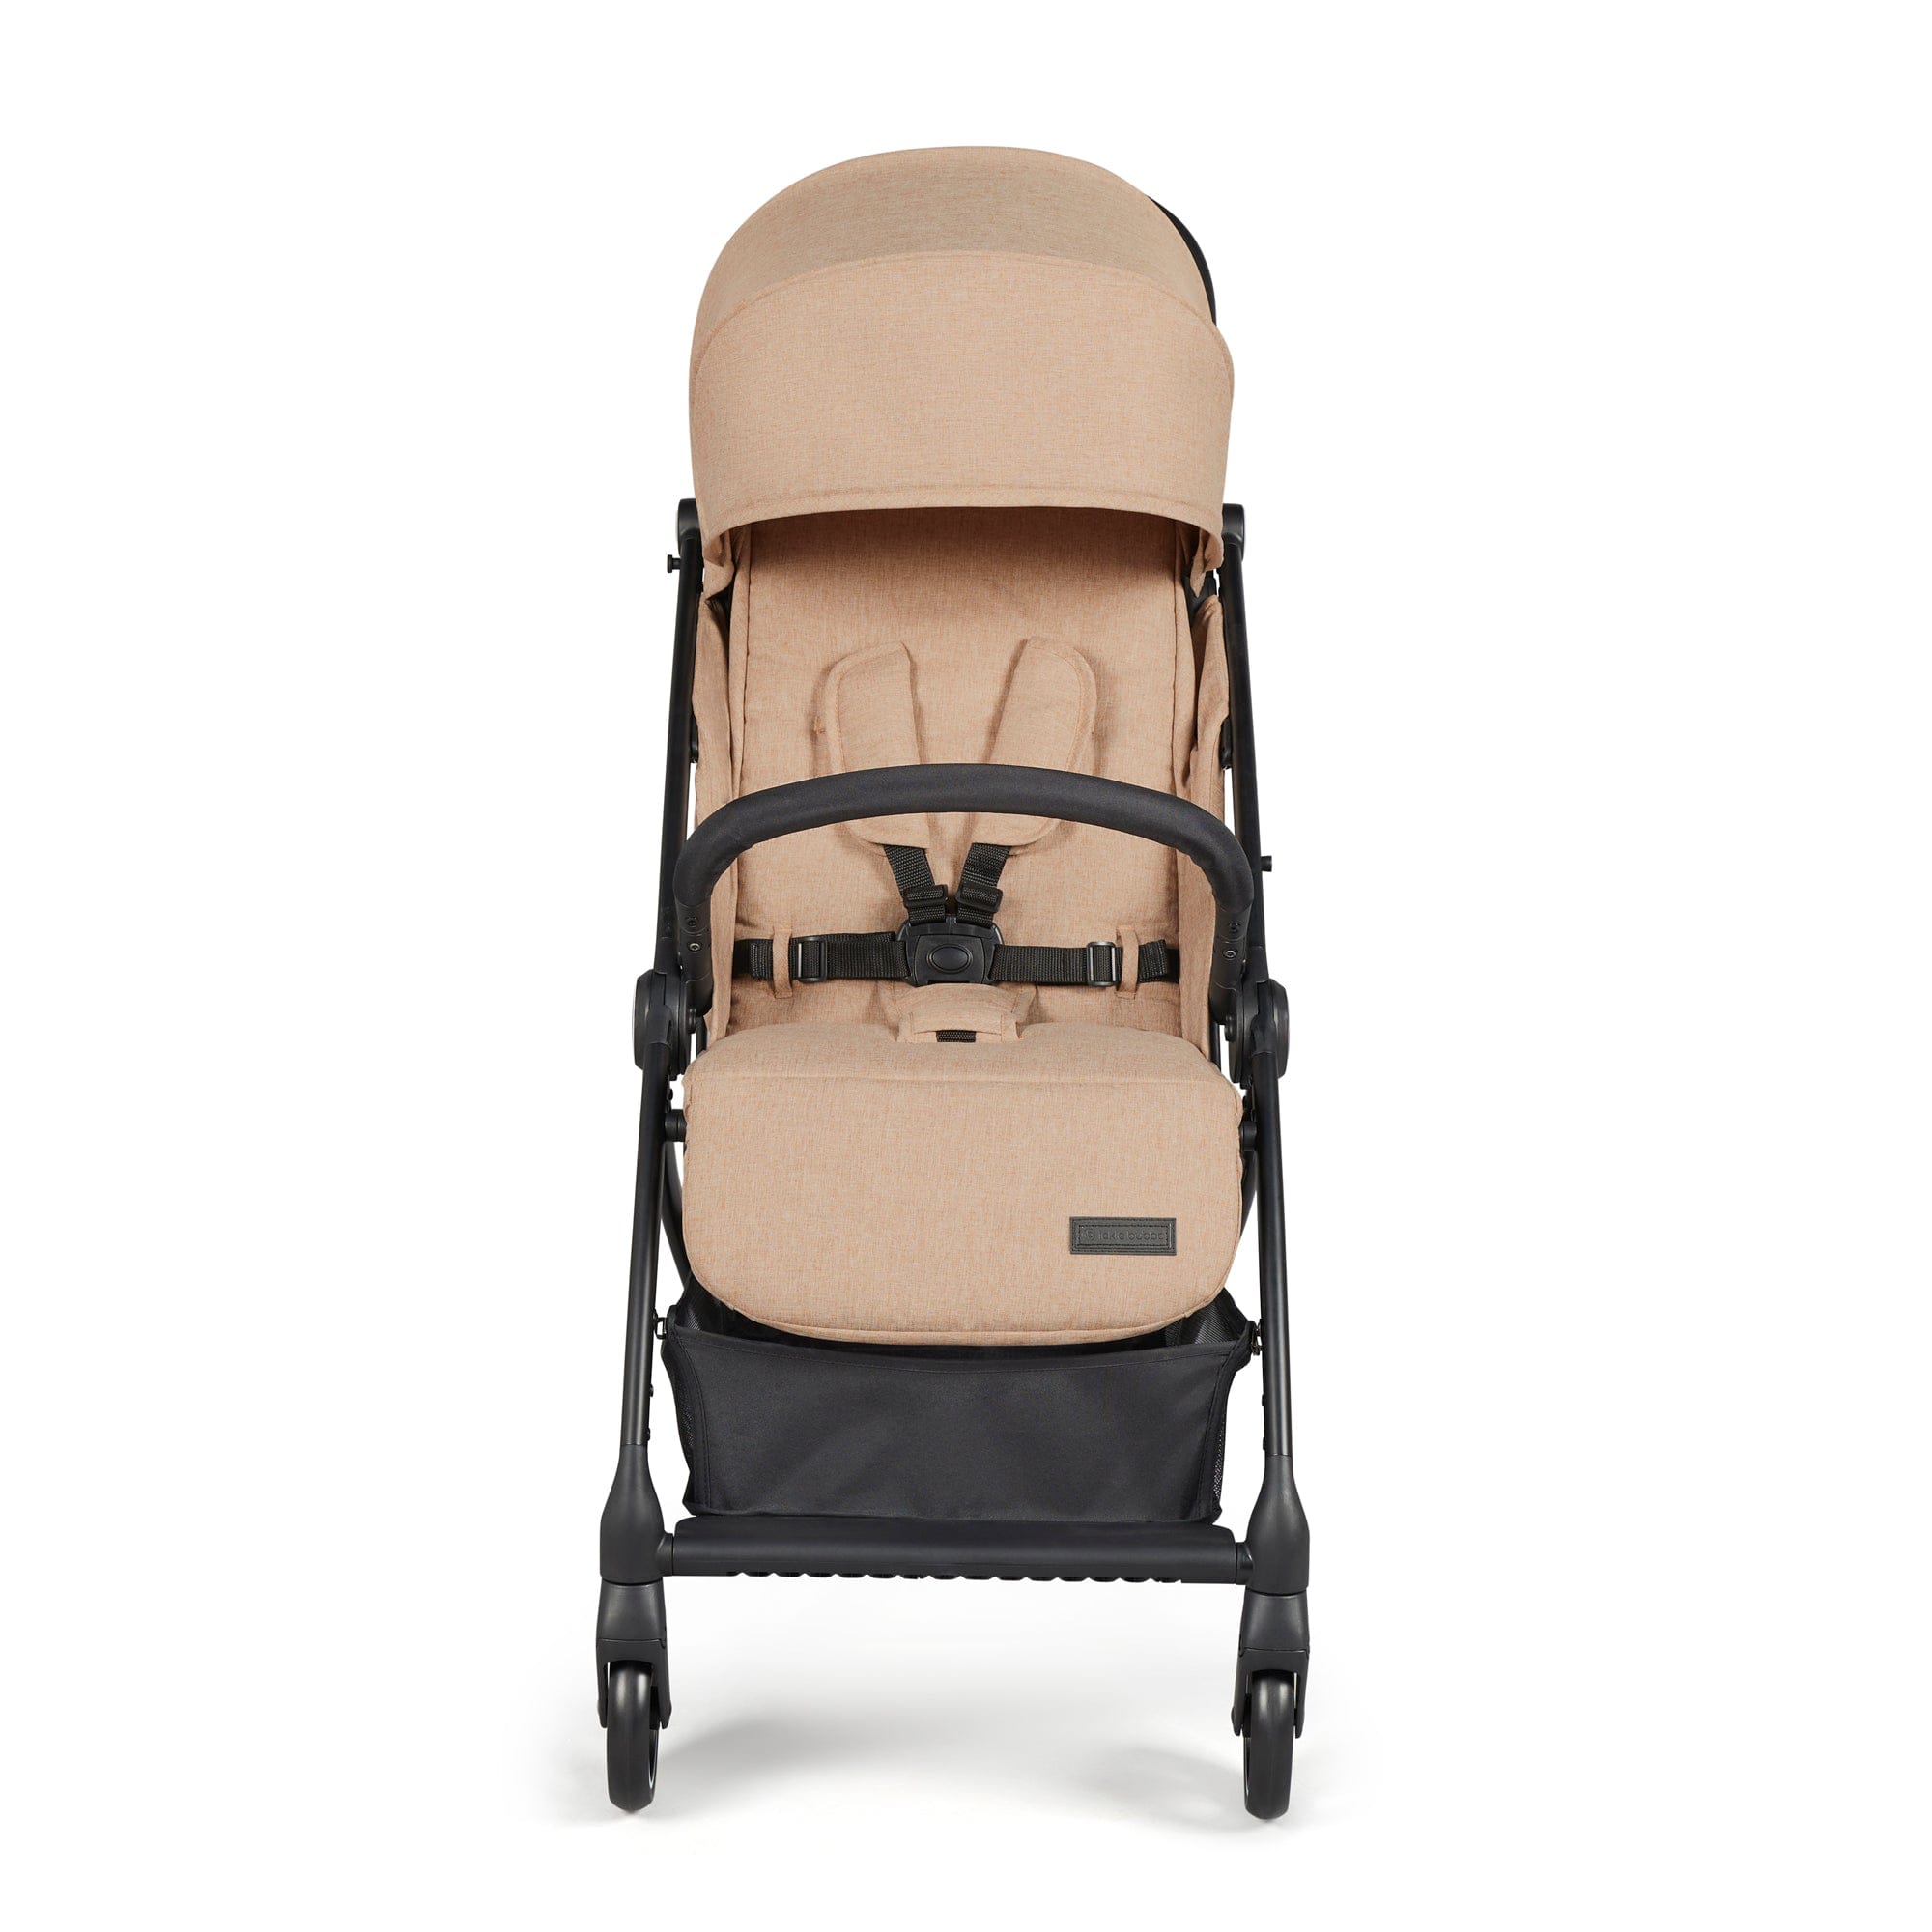 Ickle Bubba baby pushchairs Ickle Bubba Aries Max Autofold Stroller - Biscuit 15-005-200-157